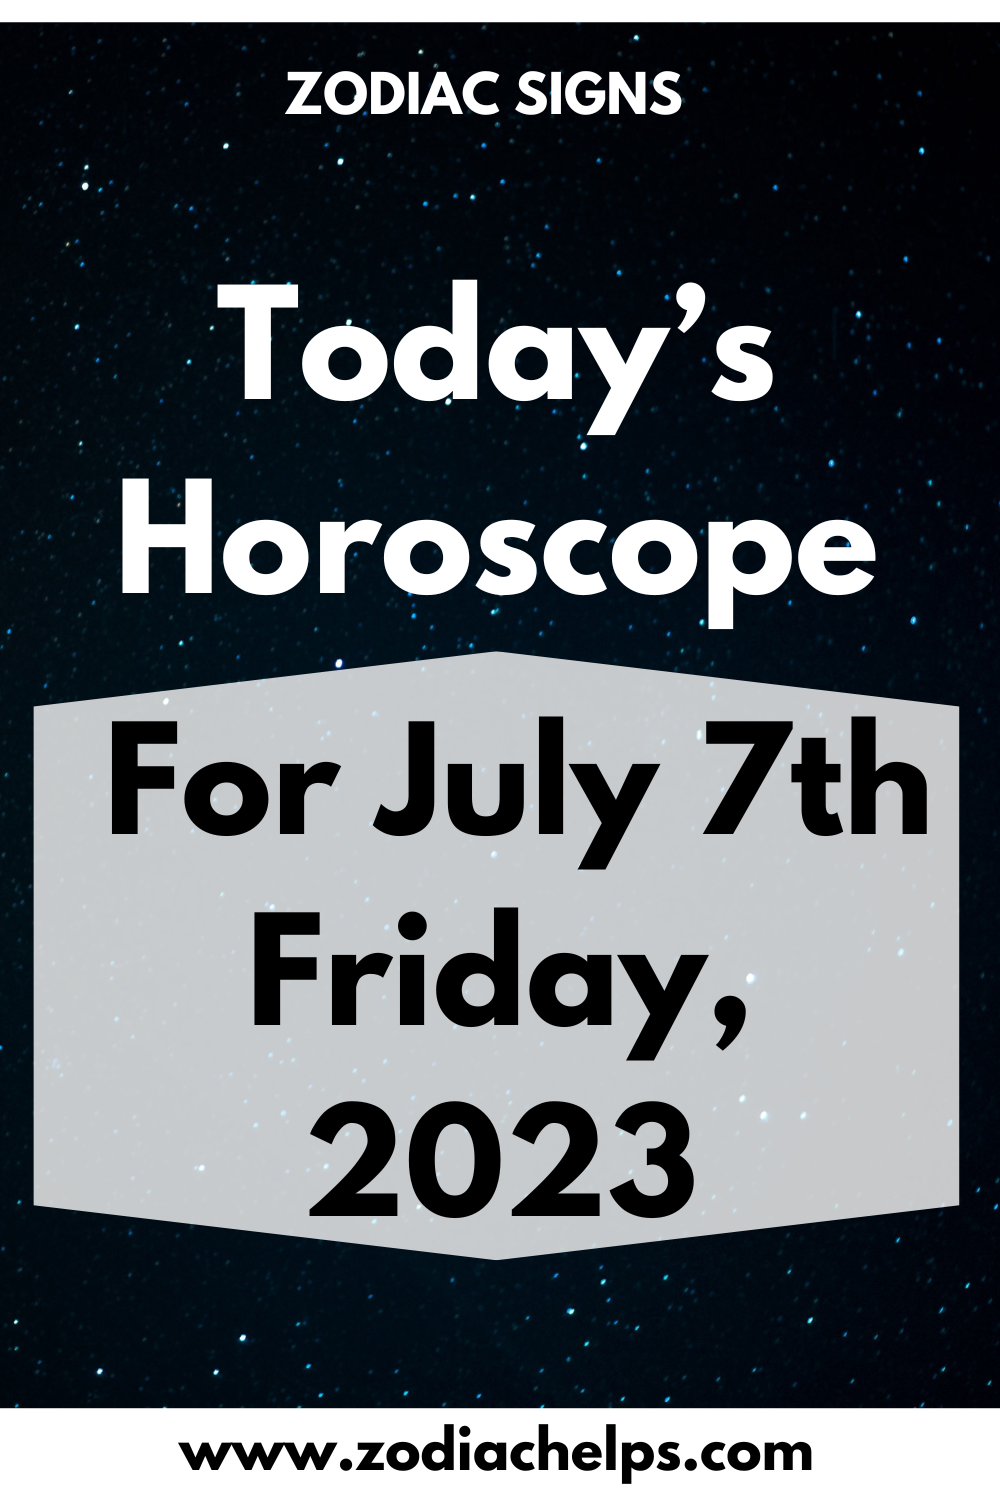 Today’s Horoscope for July 7th Friday, 2023